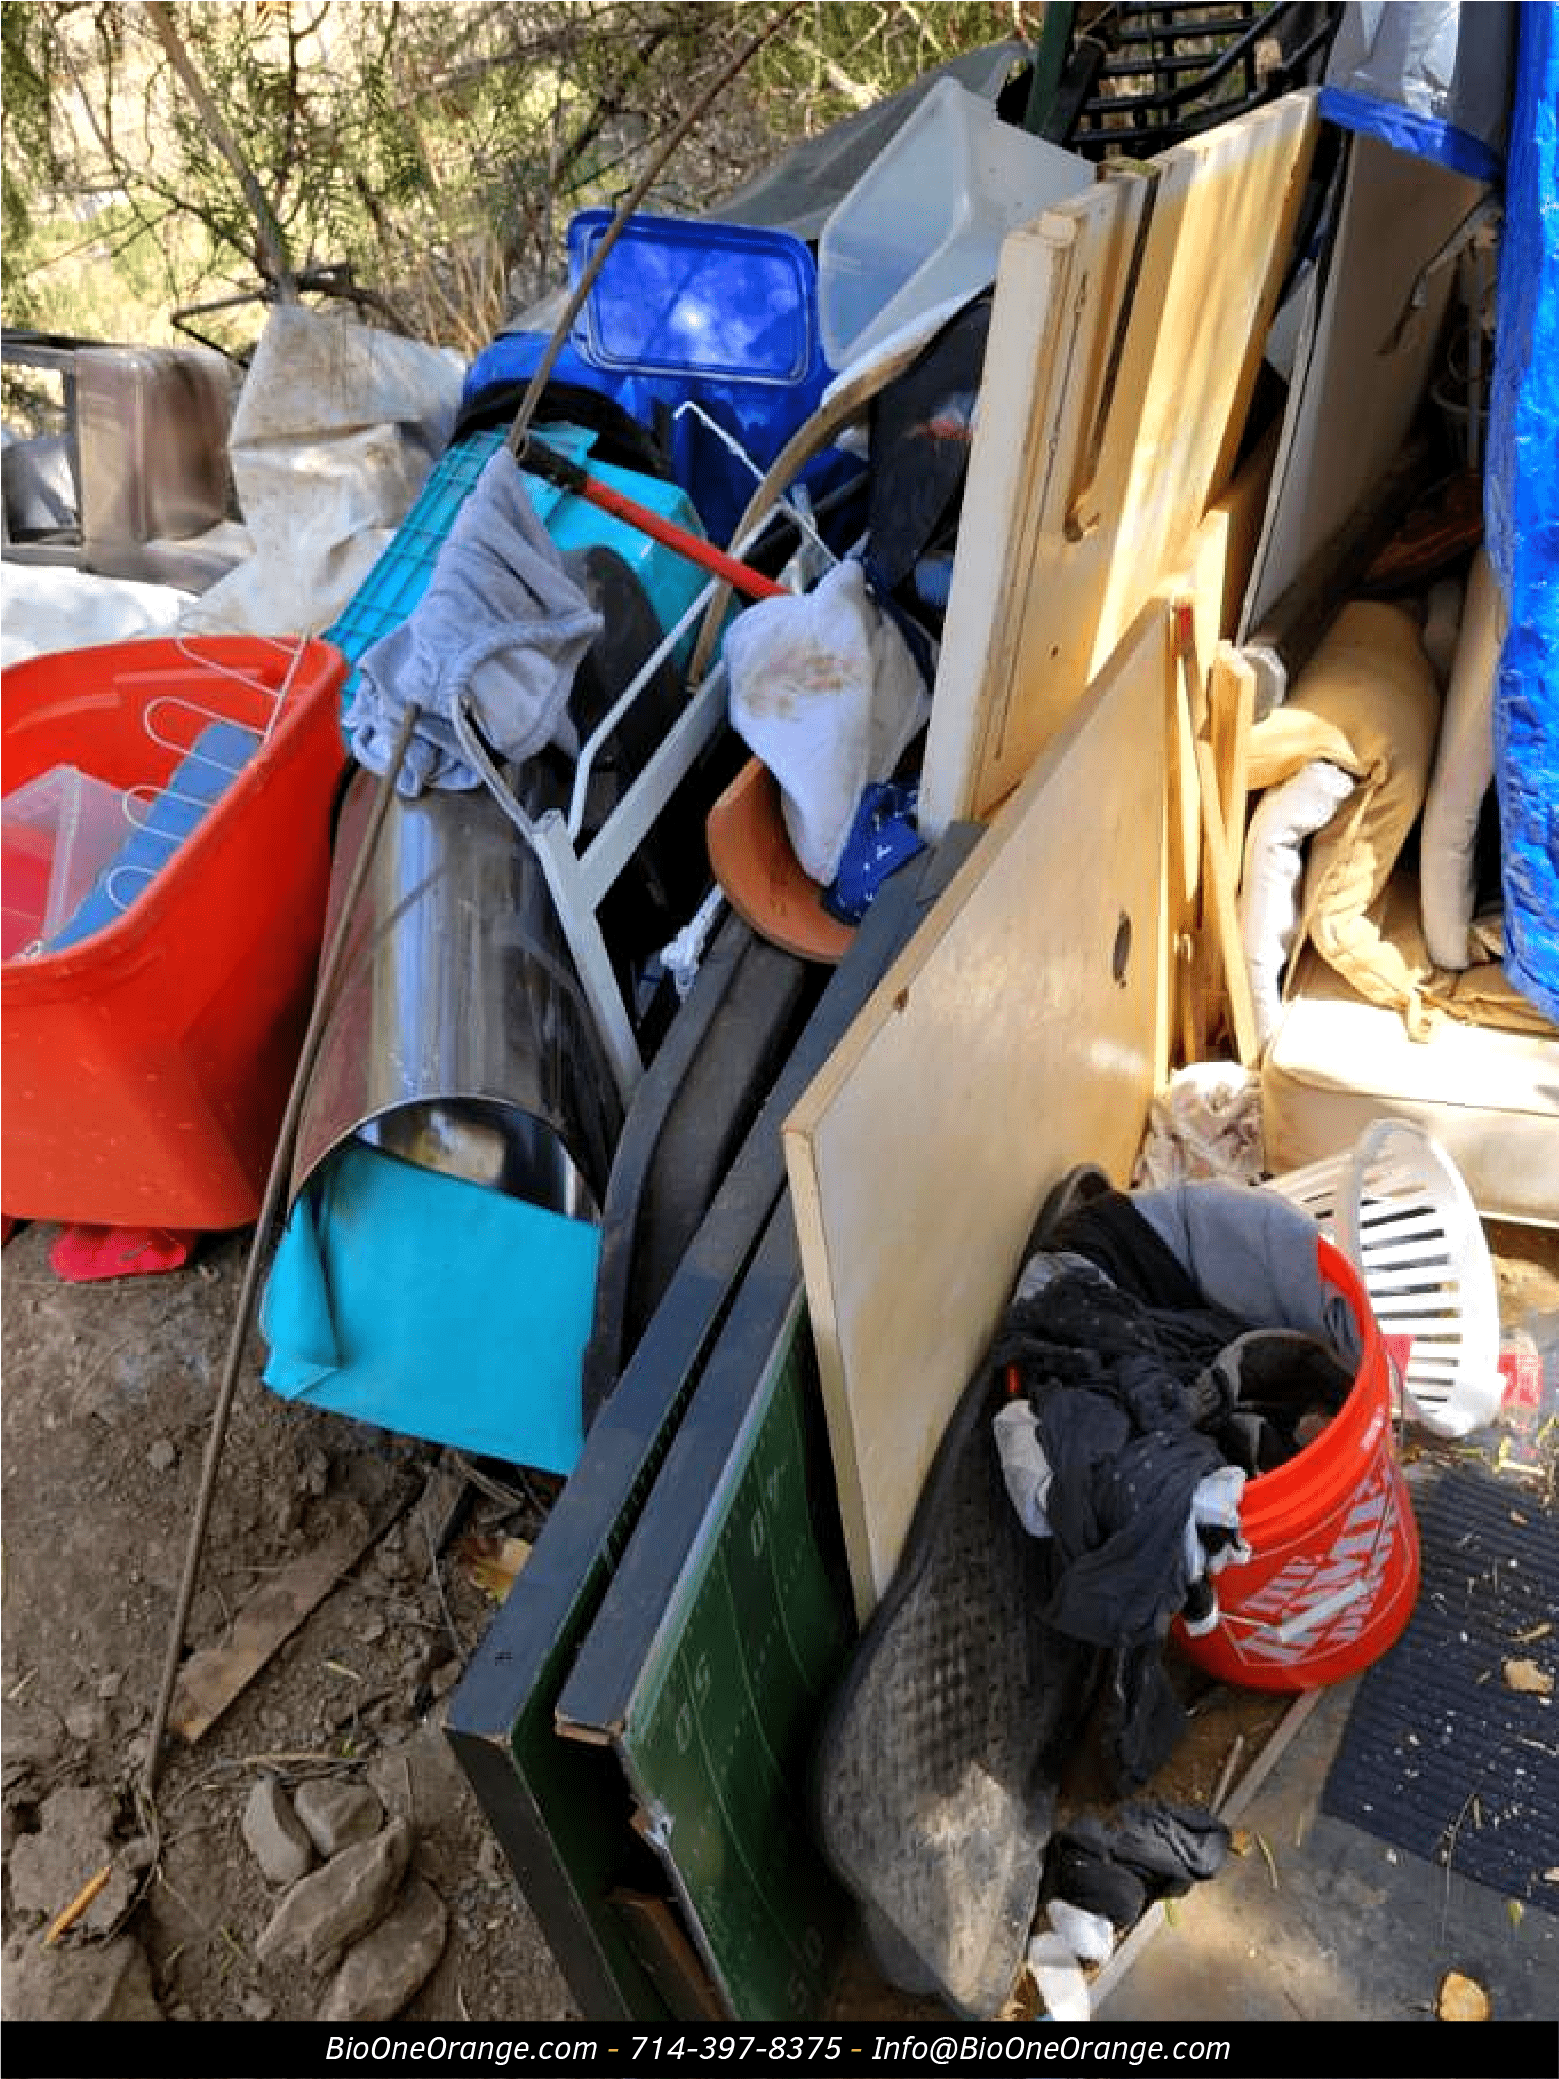 Image shows various objects found in encampment site near a residential neighborhood.